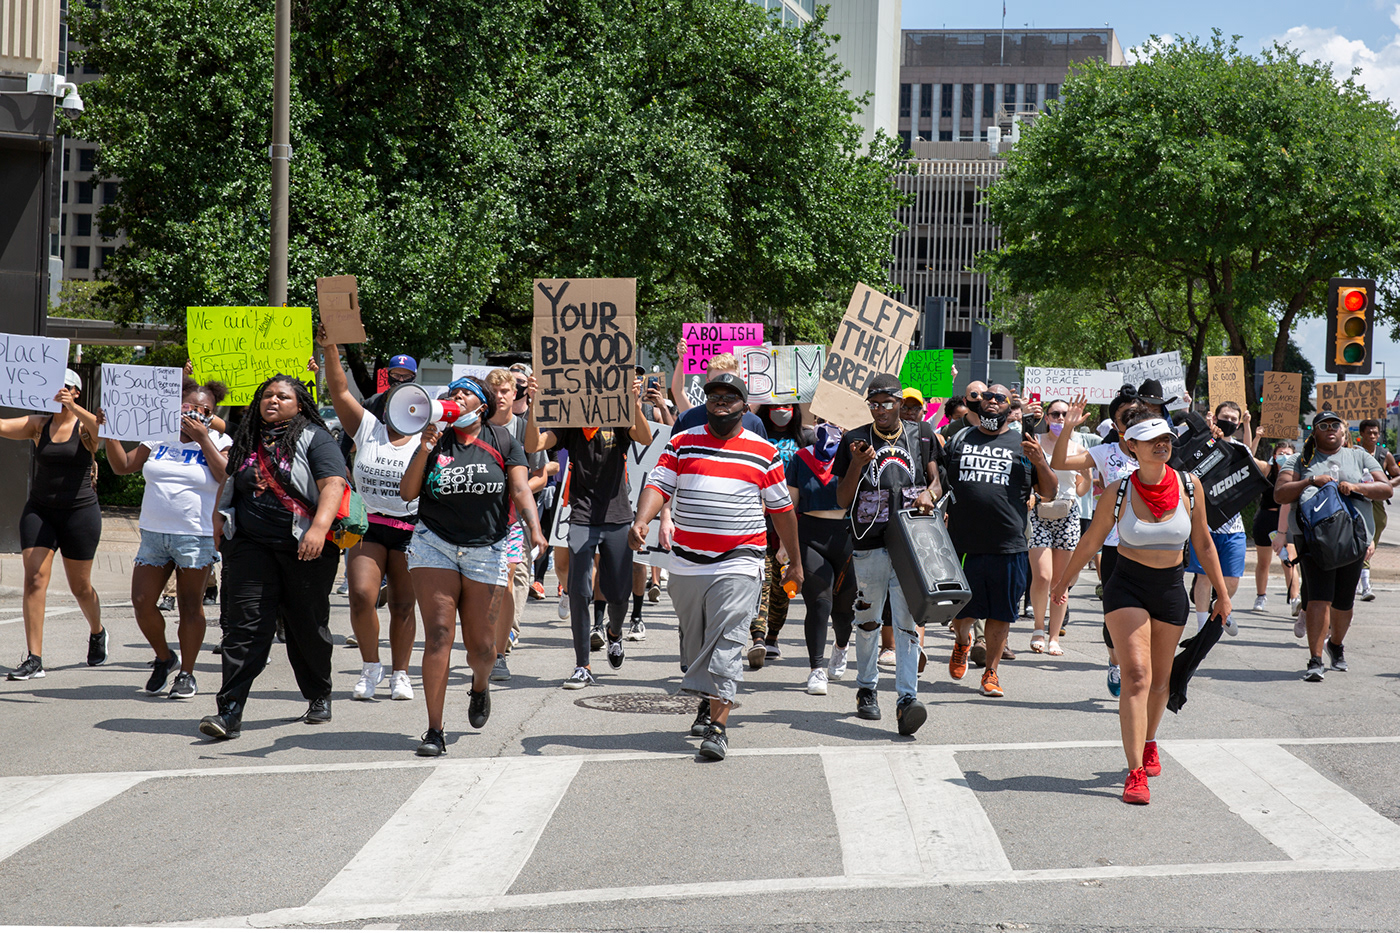 BLM protest march